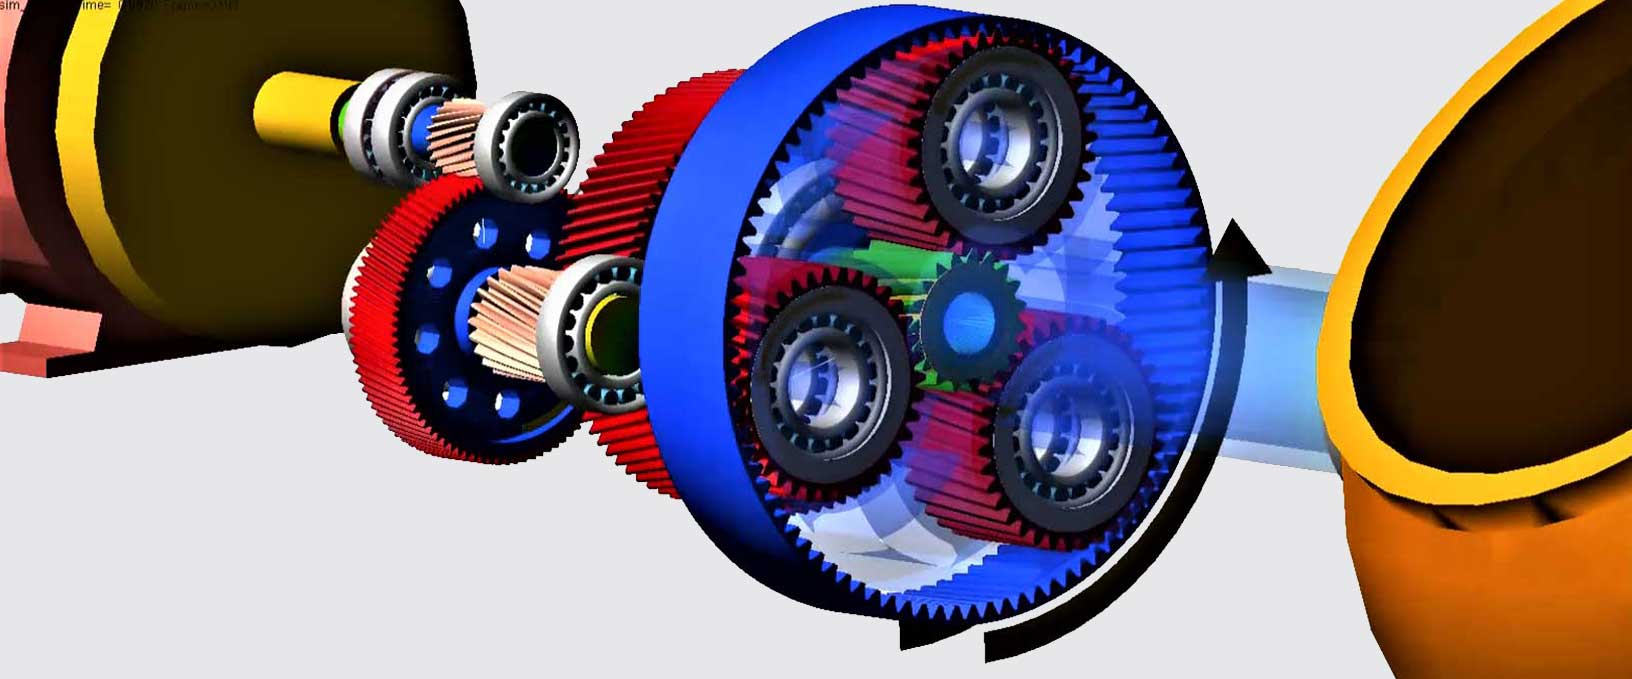 System dynamics simulation of several gears 